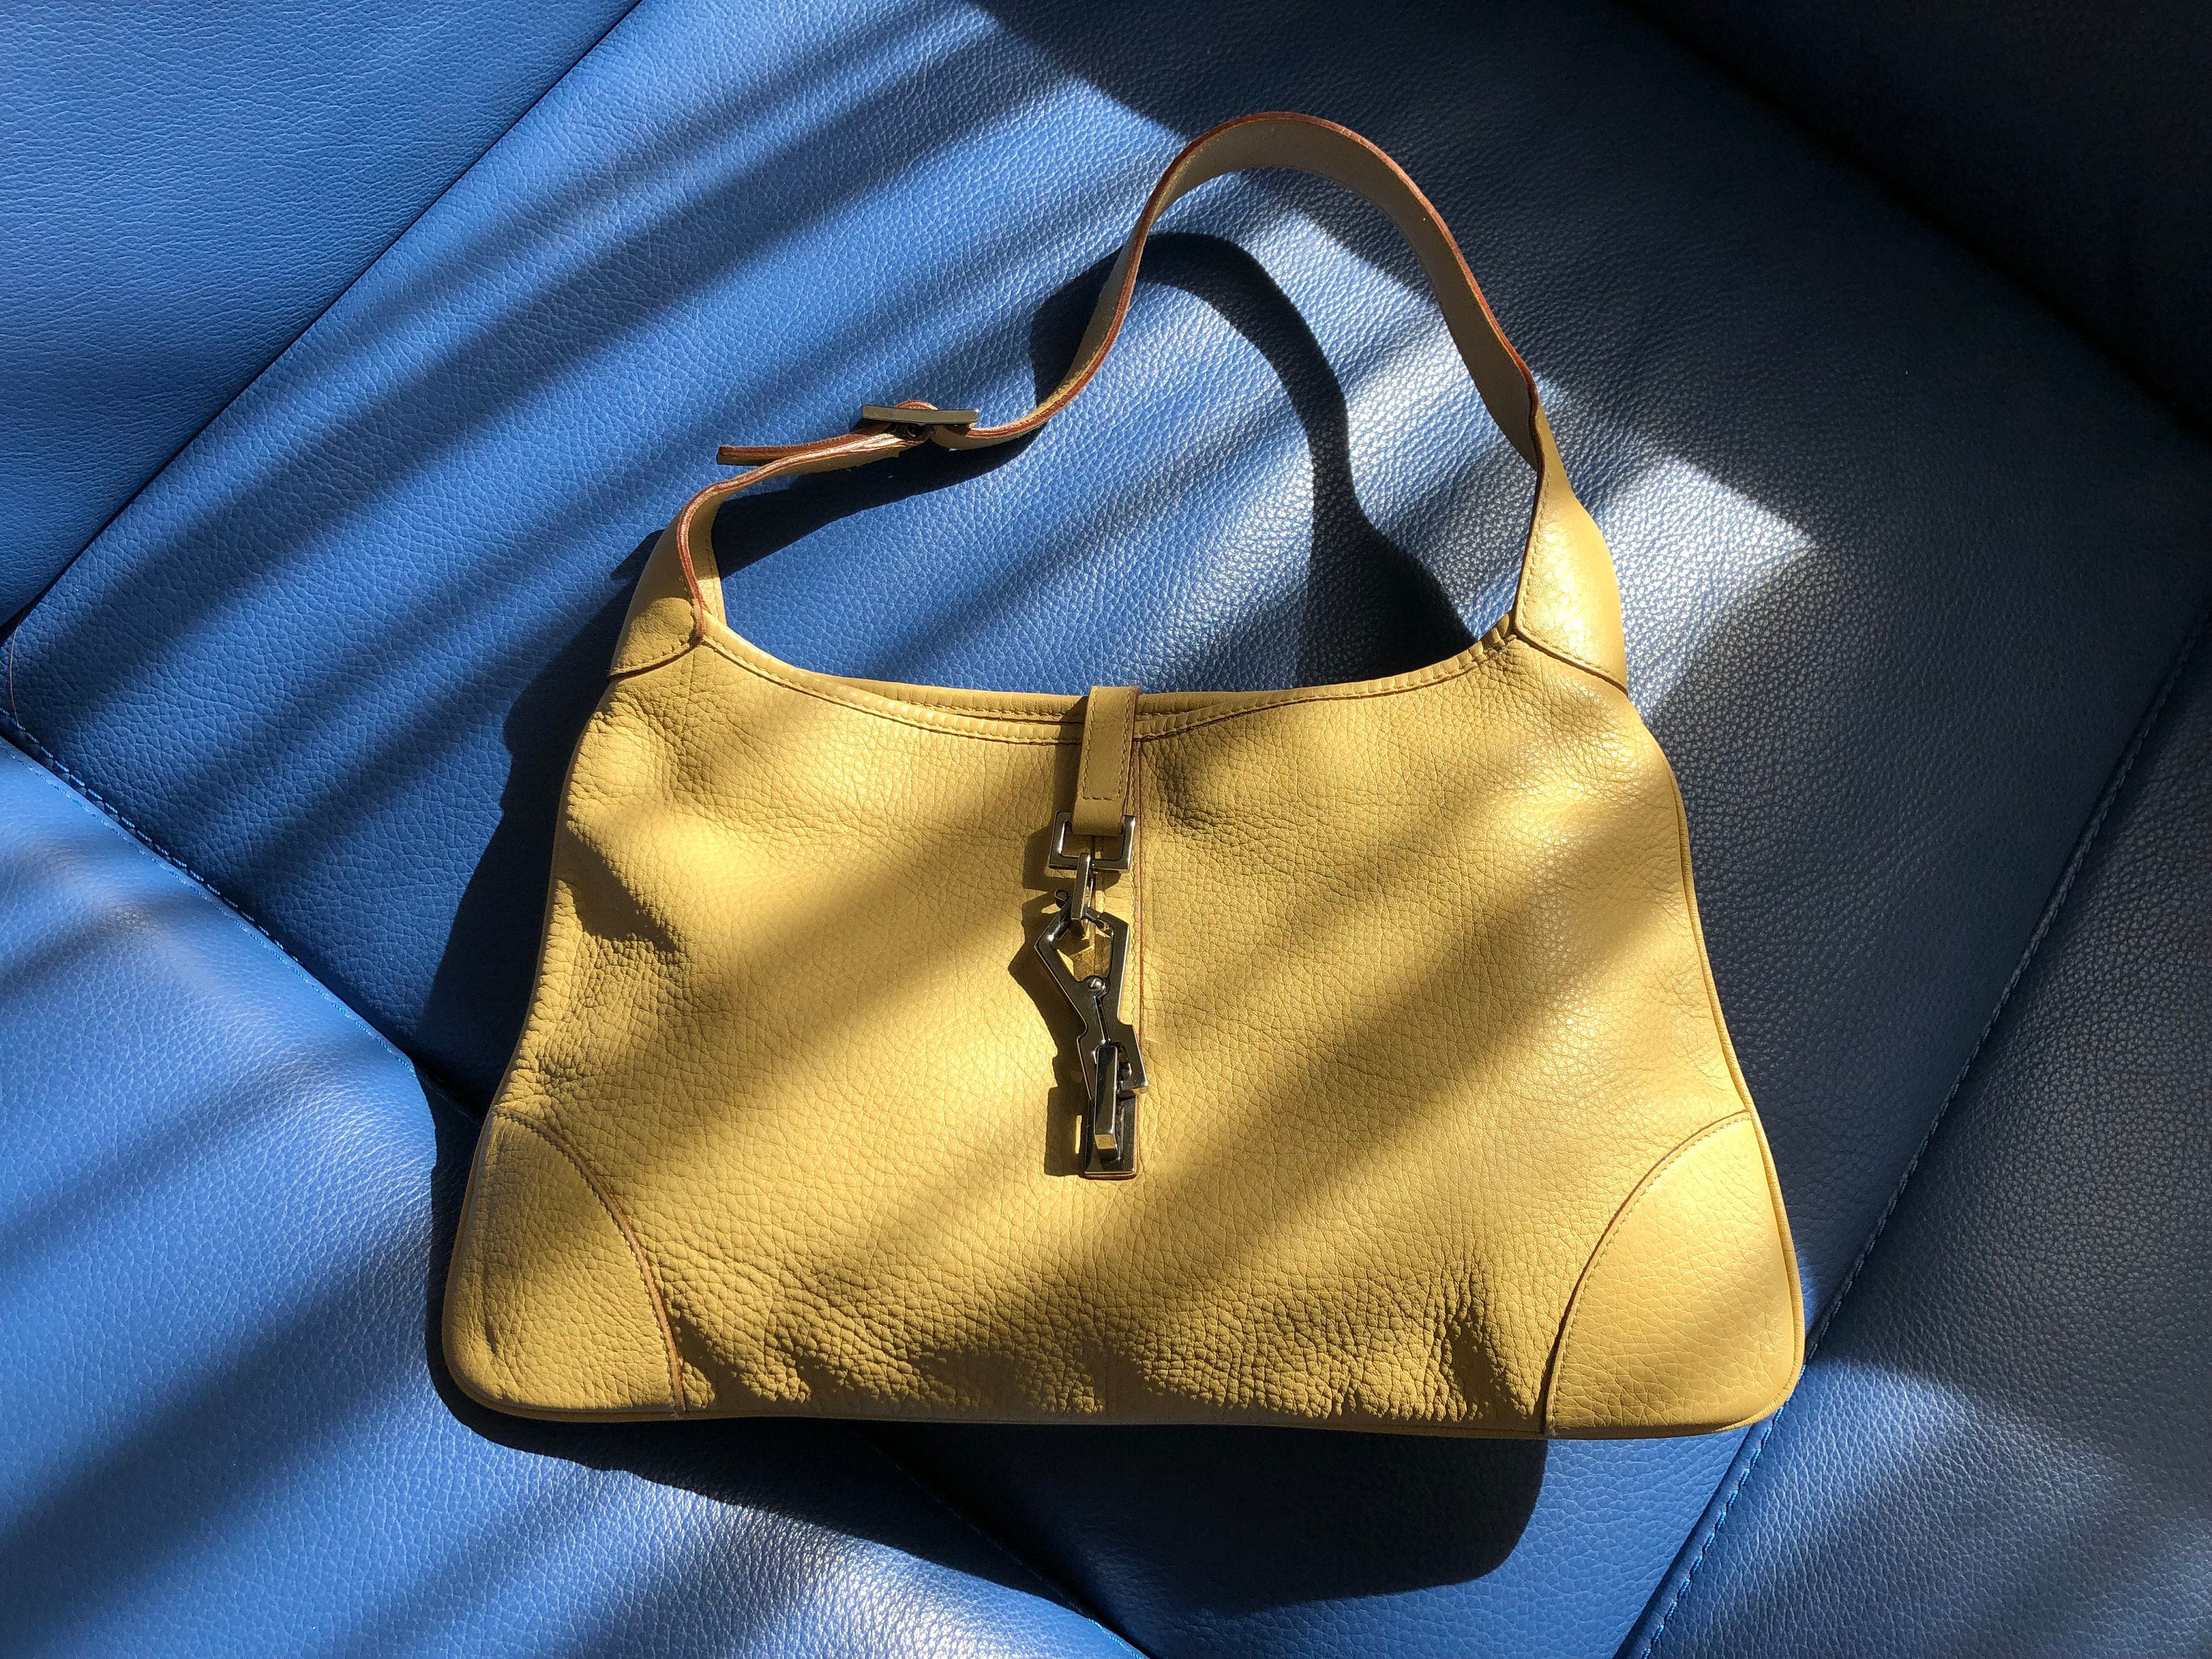 Gucci - Authenticated Jackie Vintage Handbag - Leather Yellow Plain for Women, Very Good Condition